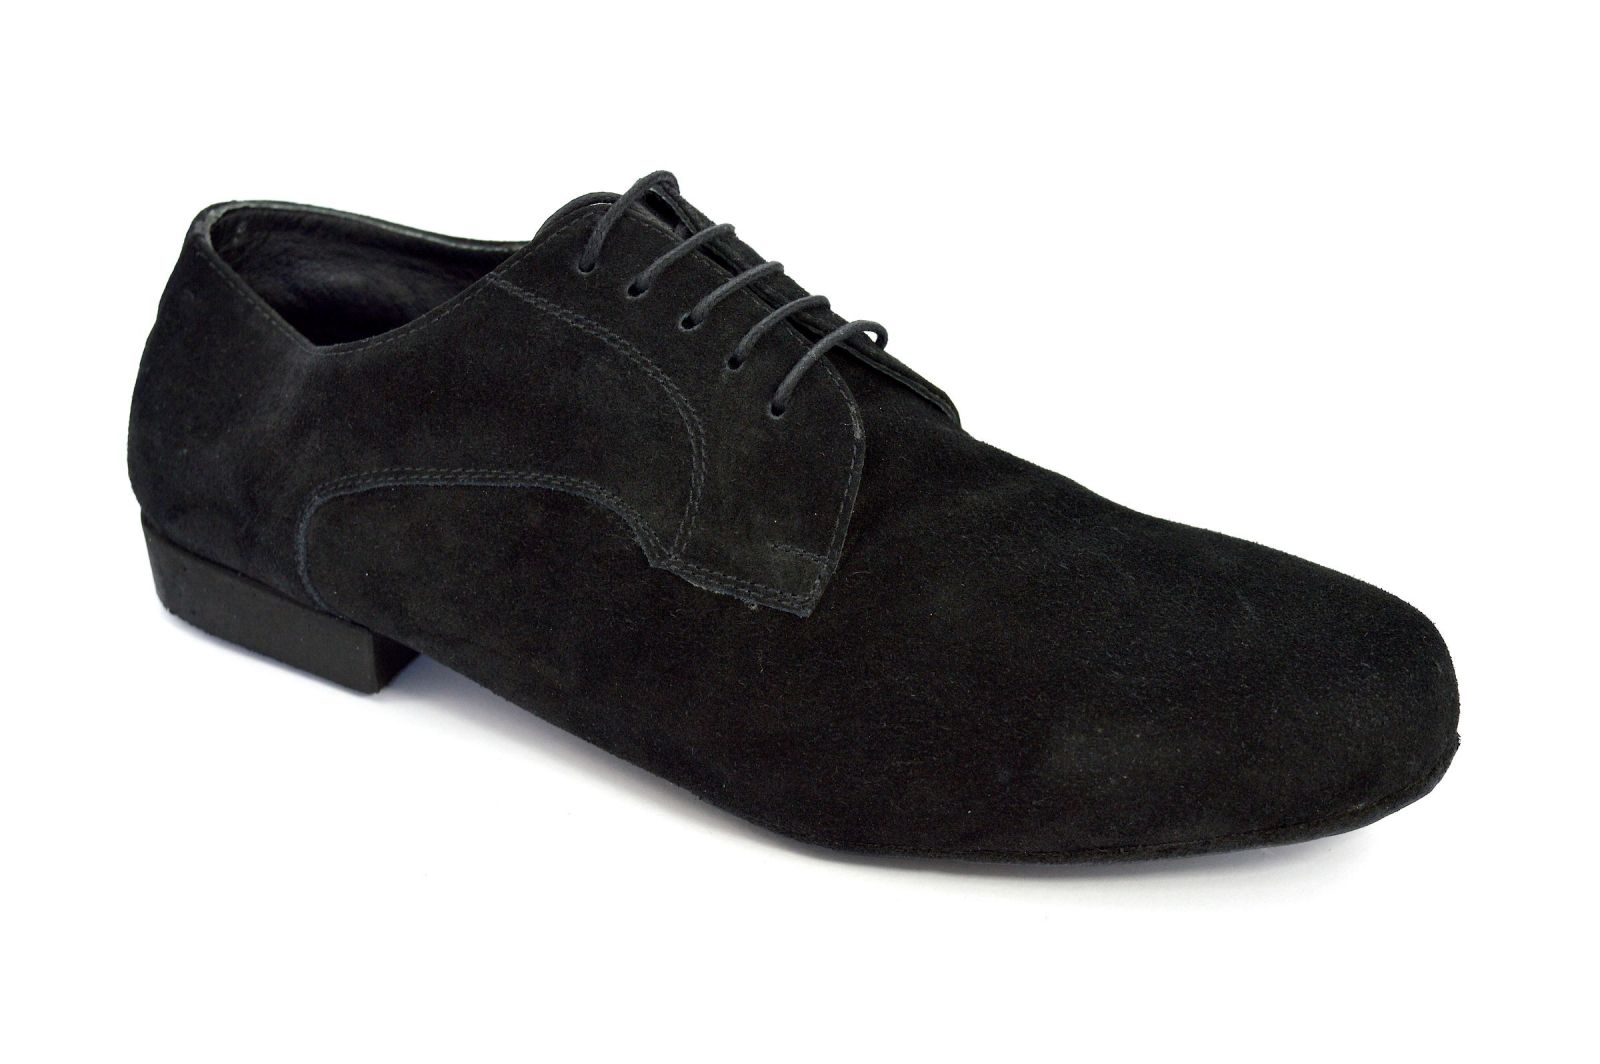 Men argentine tango dance shoes in black suede leather